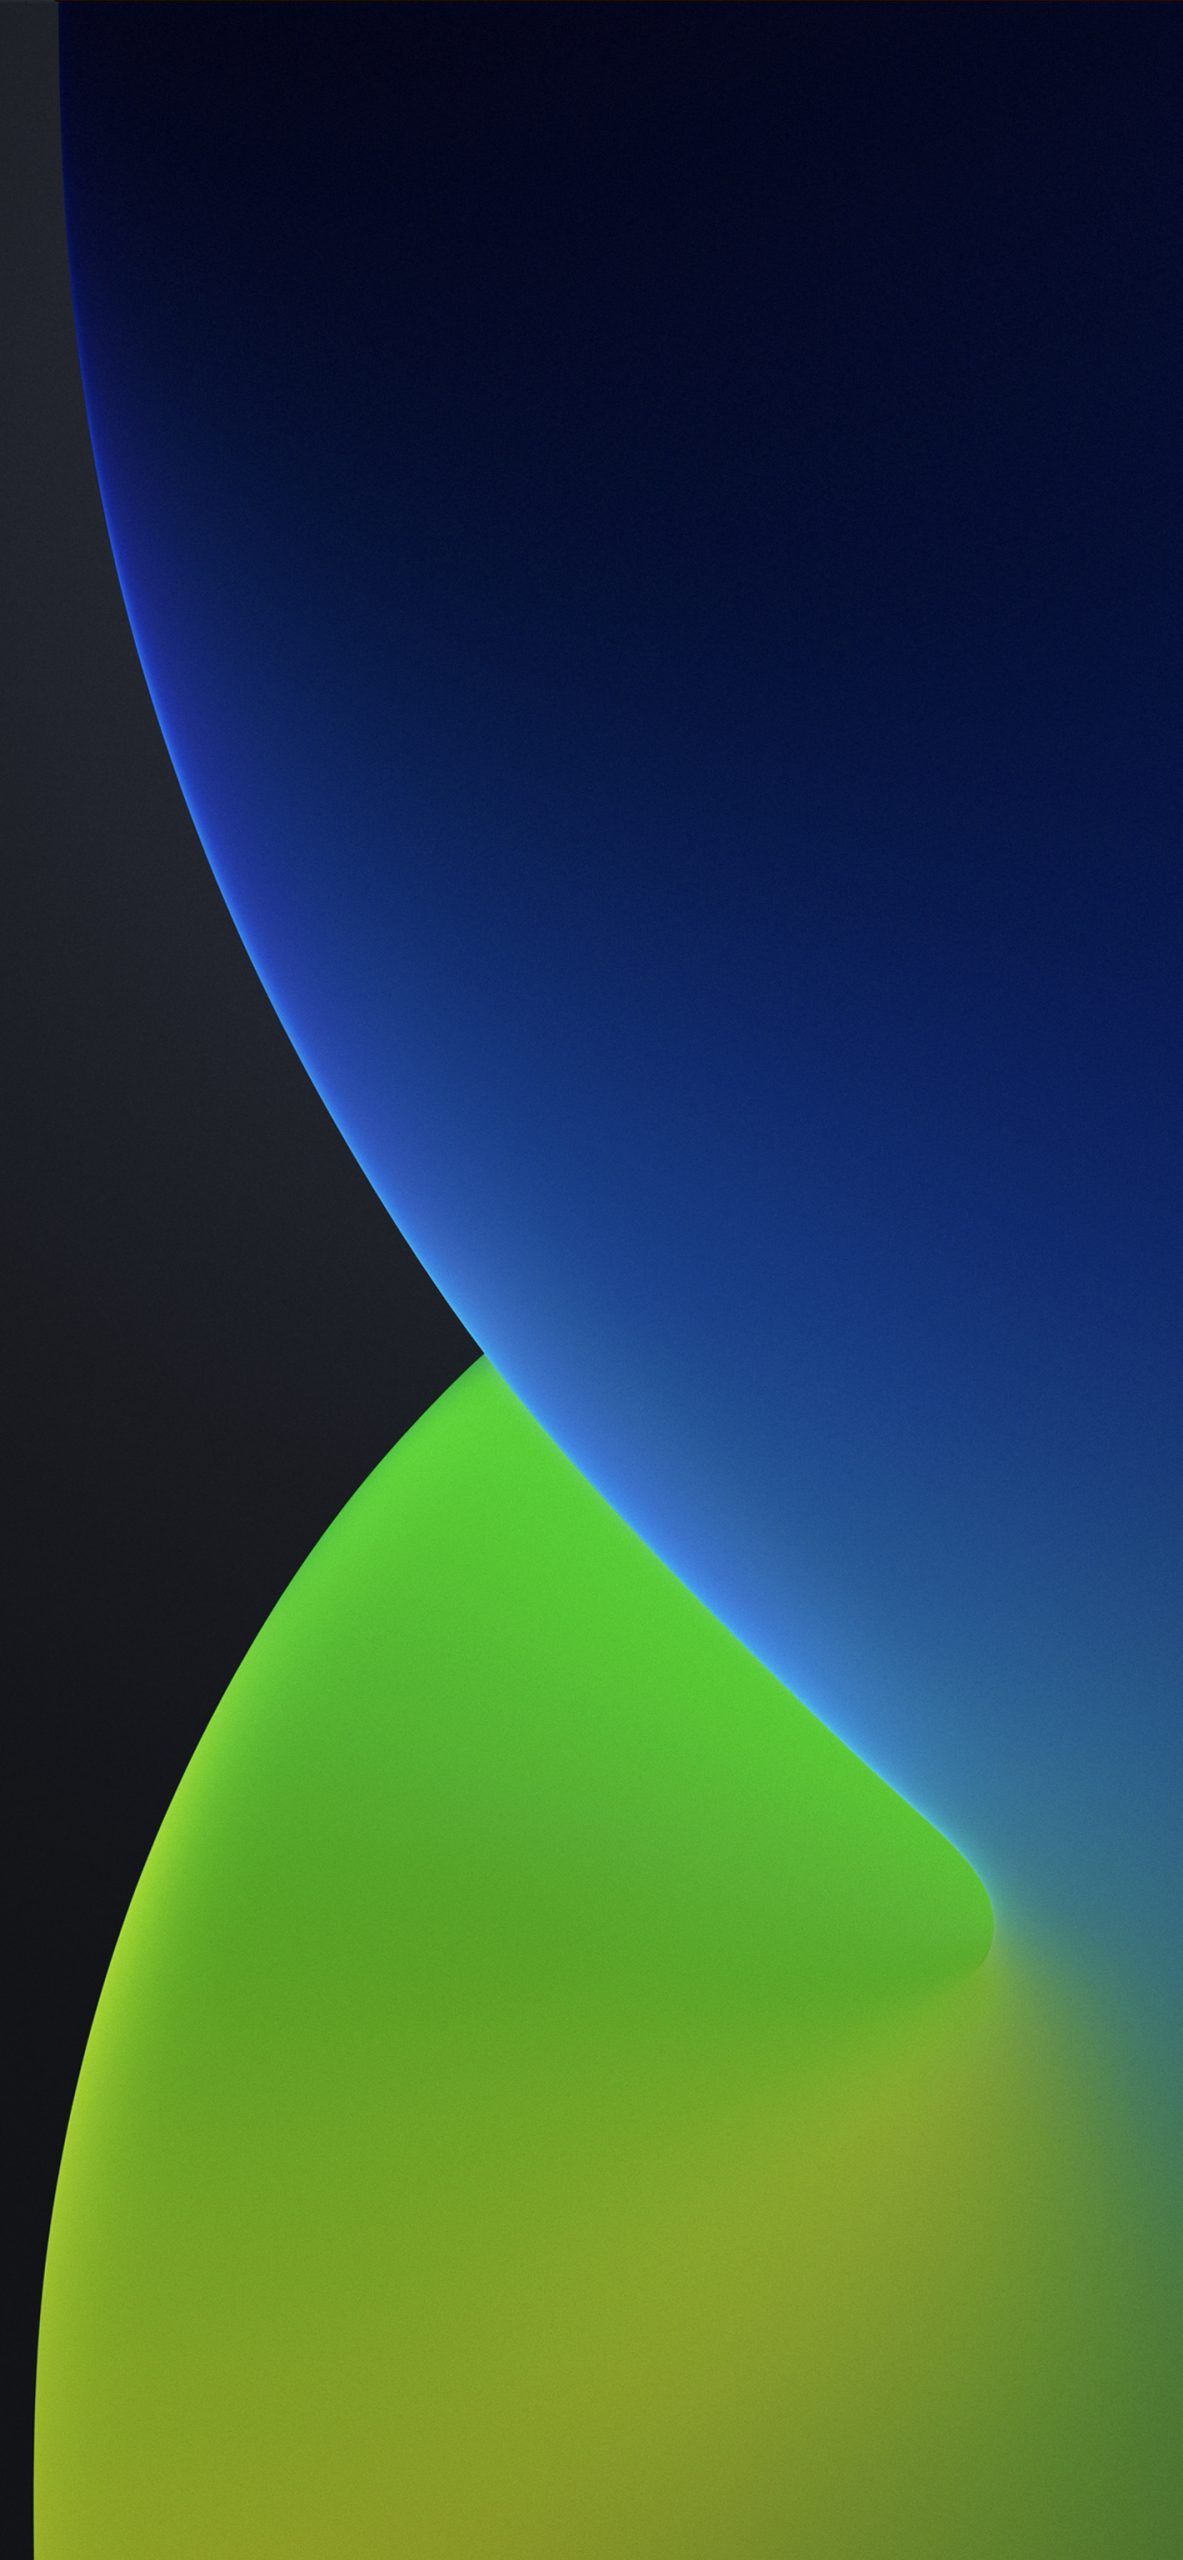 Download the new iOS 14 wallpapers for your phone